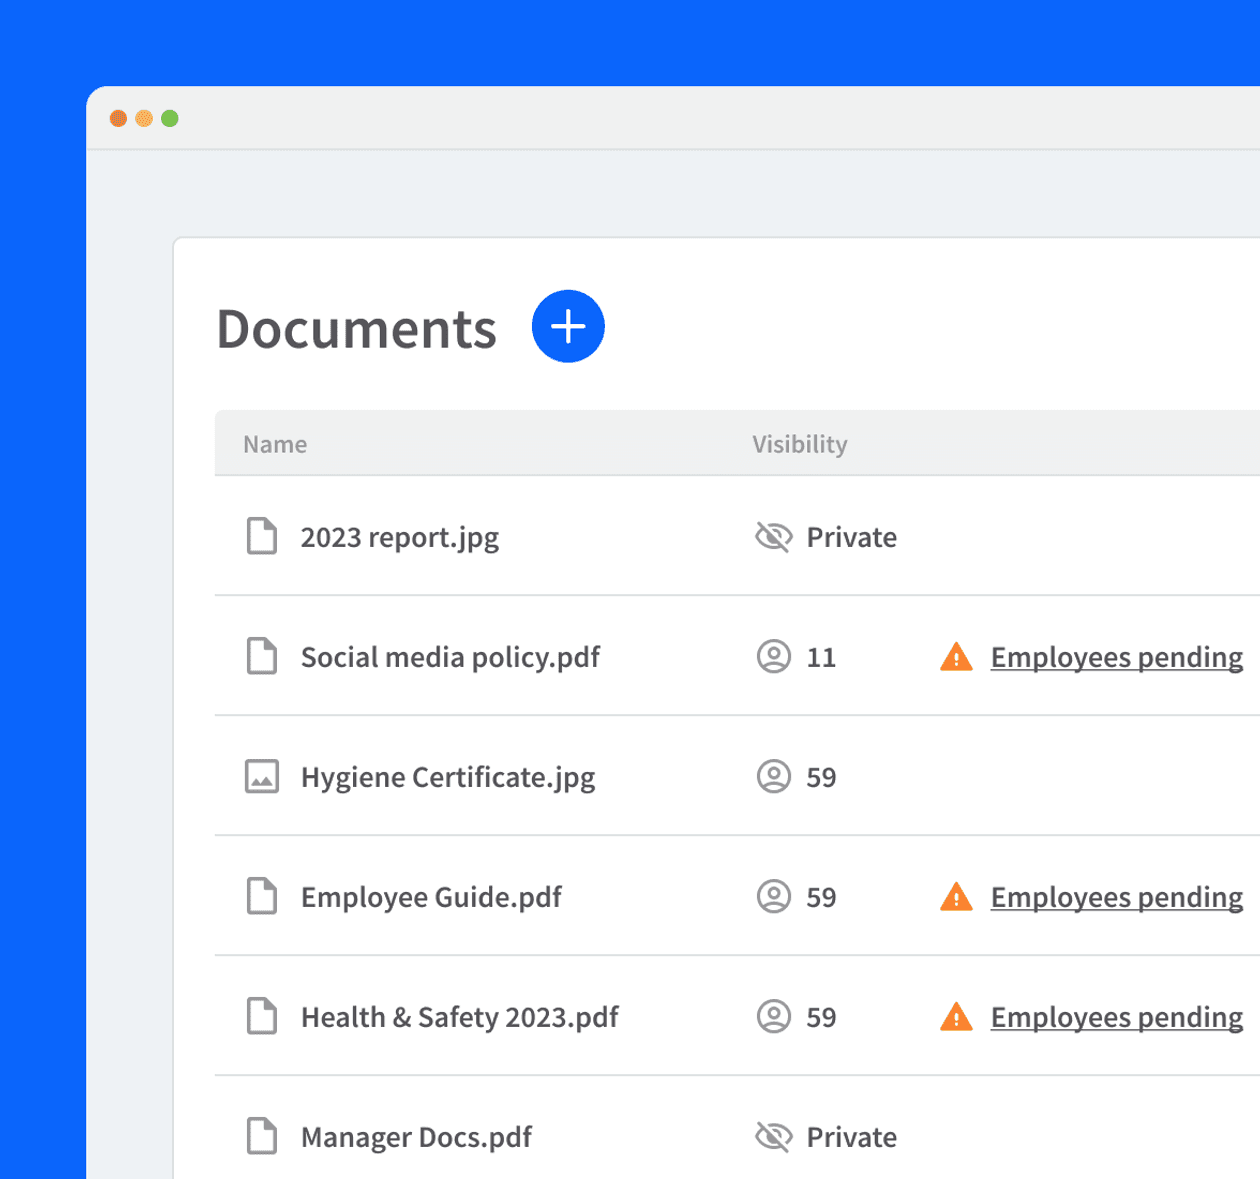 List of company documents in RotaCloud, including a hygiene certificate, an employee guide, and social media policy. Their visibility is also shown - some documents are marked as private, others show the number of employees they have been shared with.